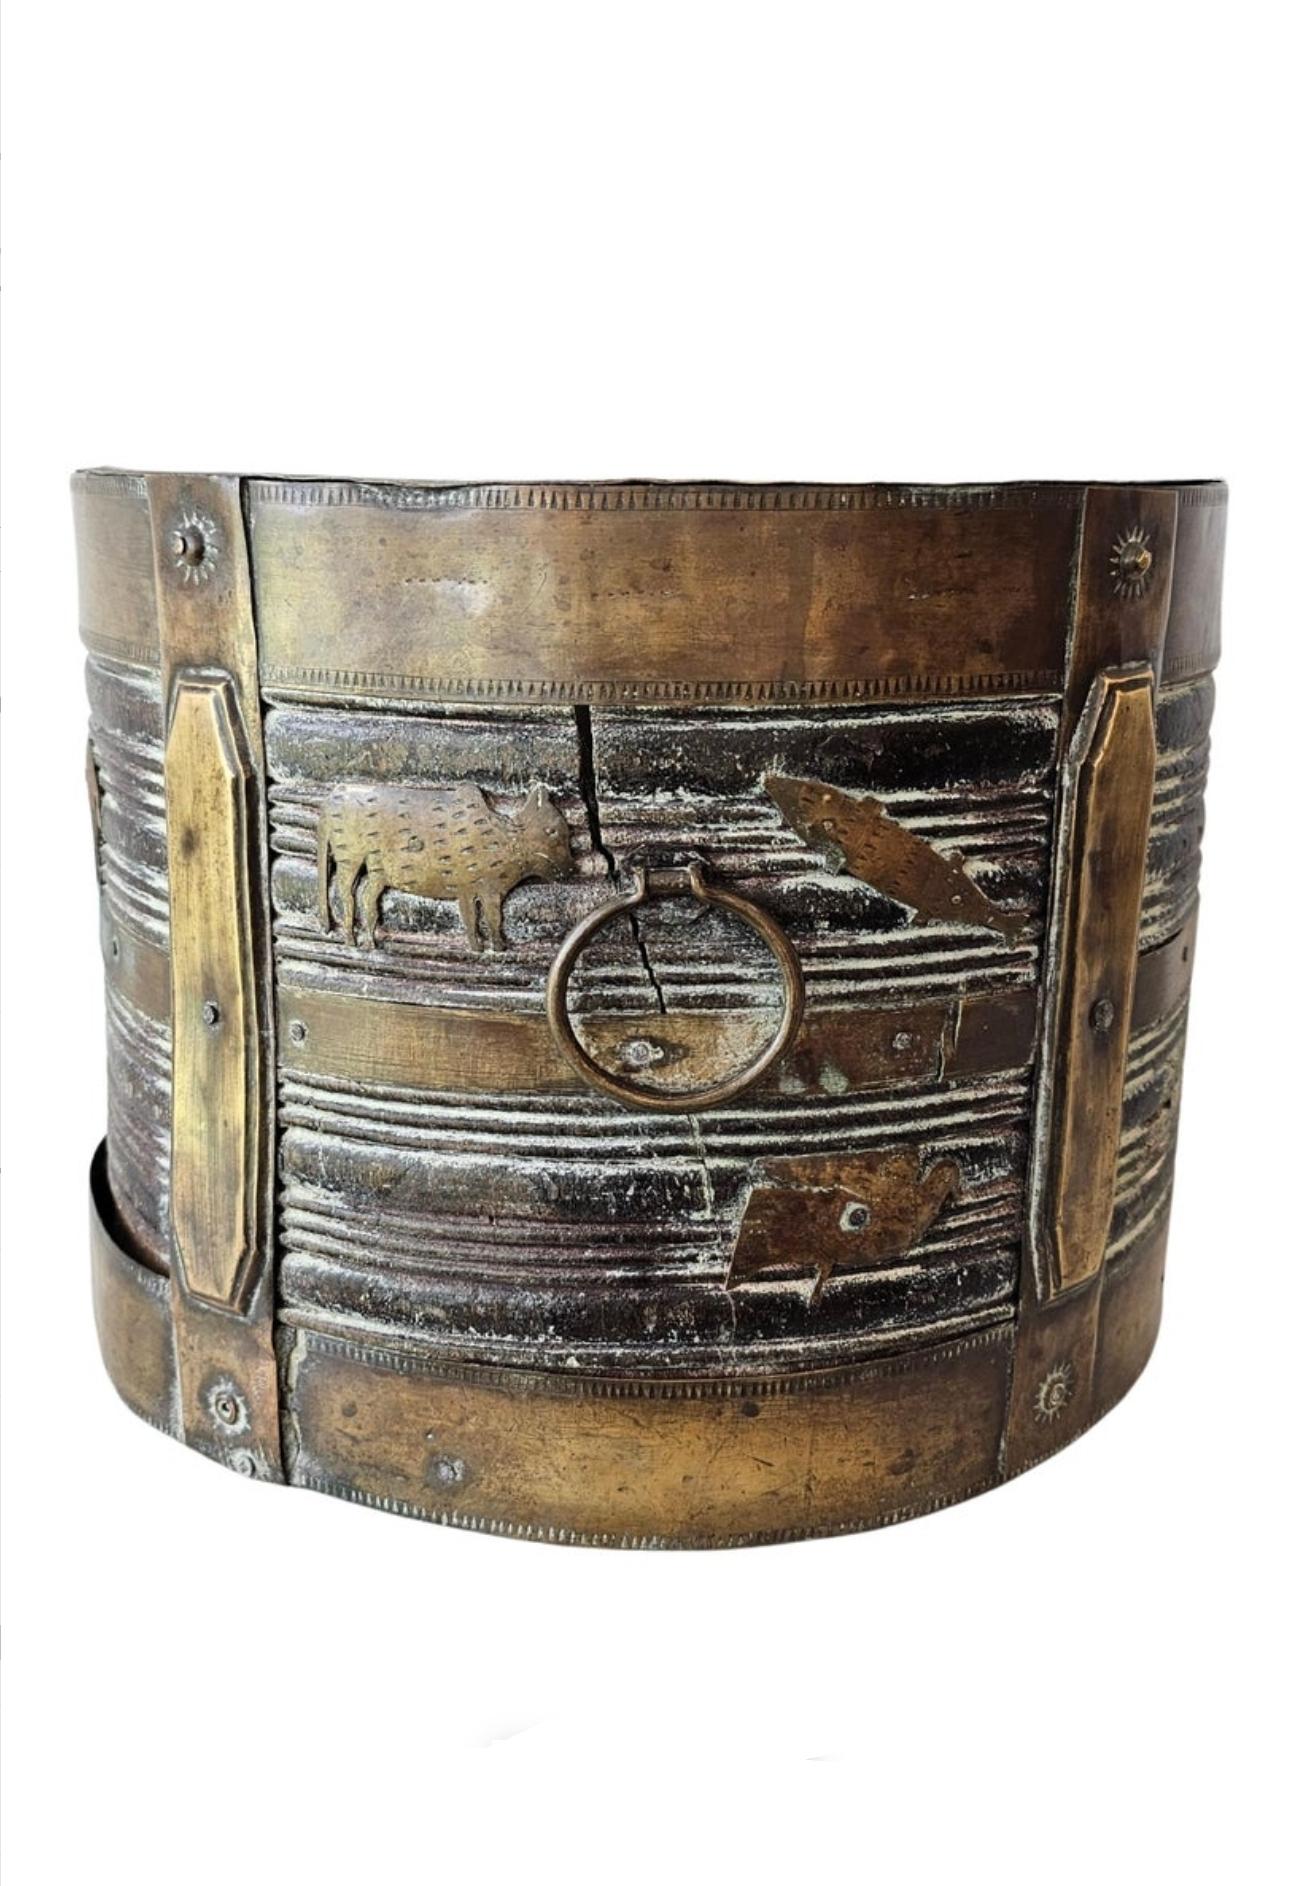 A scarce antique British Colonial brass-mounted wood bucket (fireplace coal hod - kindling bin - pail - outdoor planter) circa 1820

Hand-crafted in India during the British East India Company rule on the Indian subcontinent (pre-British Raj period)